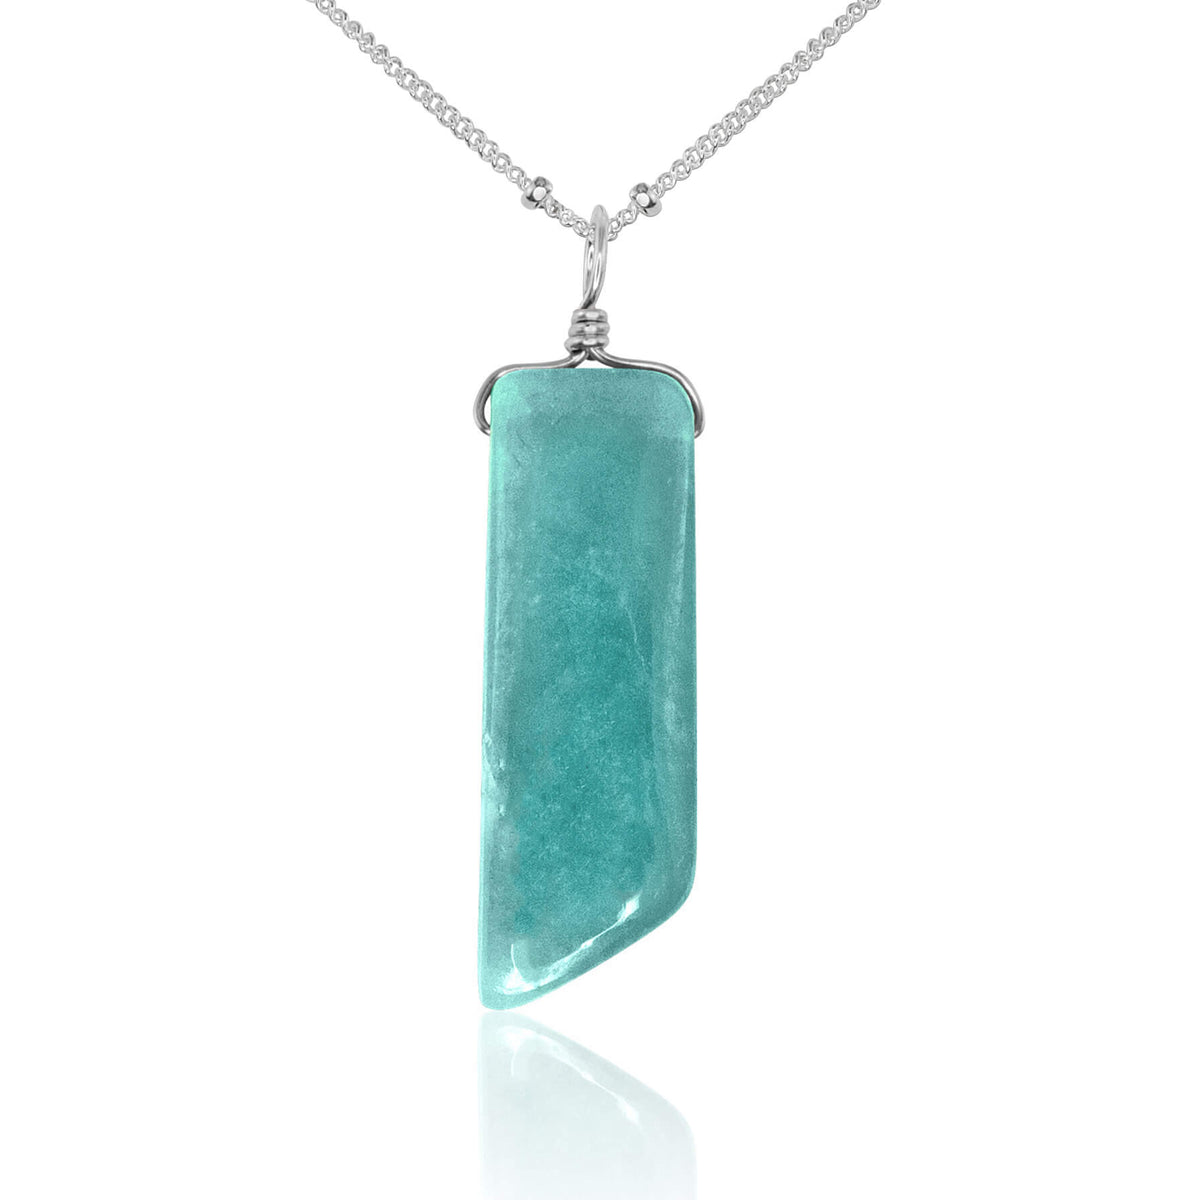 Smooth Point Pendant Necklace - Amazonite - Sterling Silver Satellite - Luna Tide Handmade Jewellery